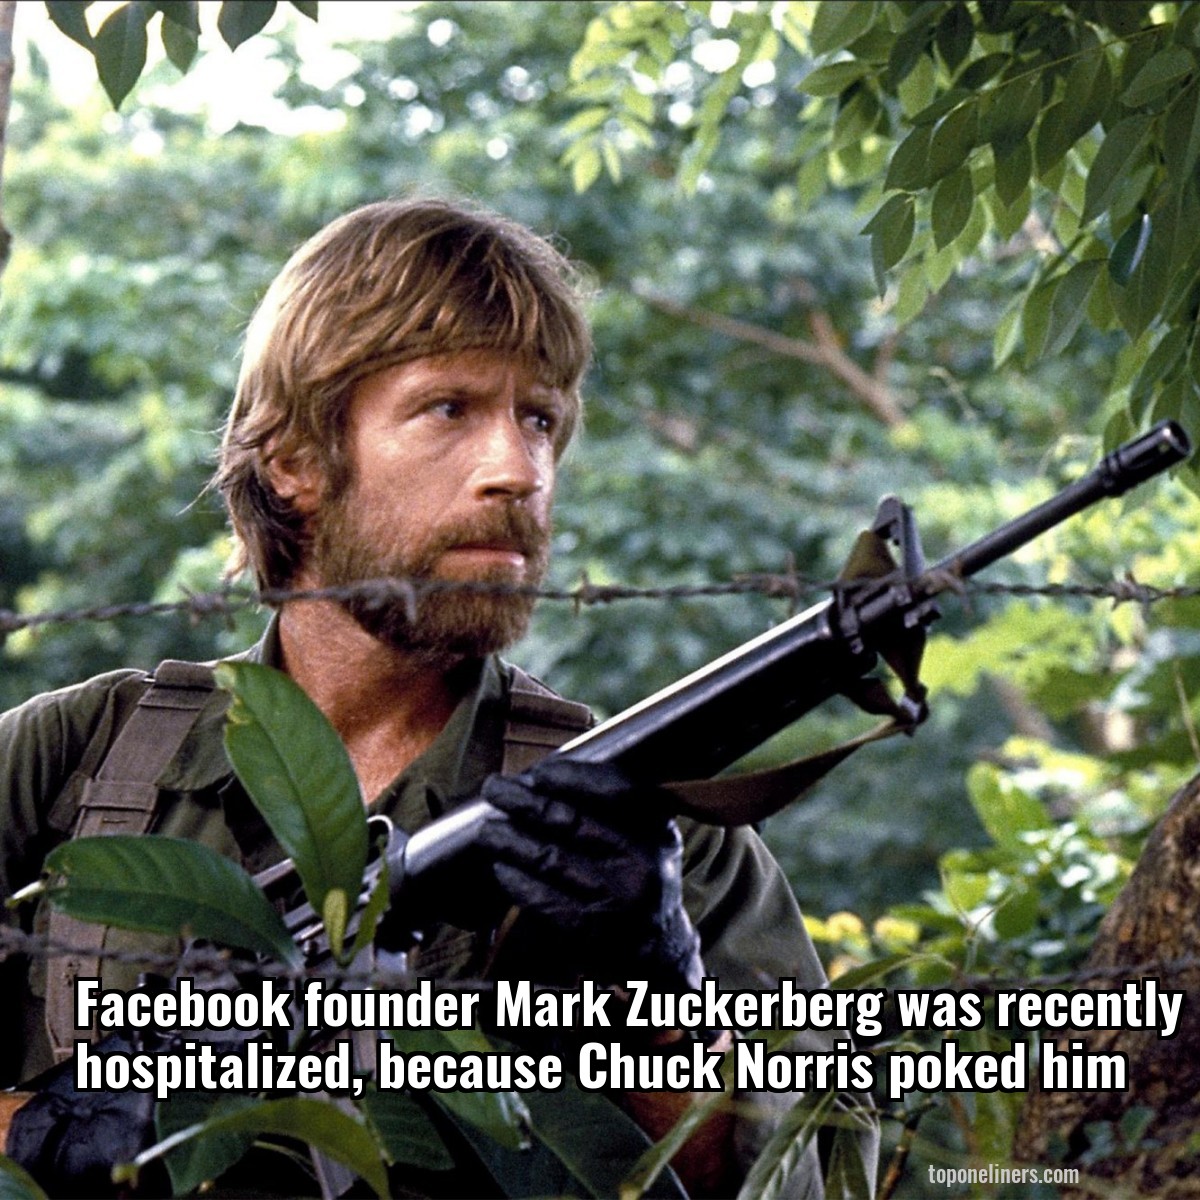 Facebook founder Mark Zuckerberg was recently hospitalized, because Chuck Norris poked him